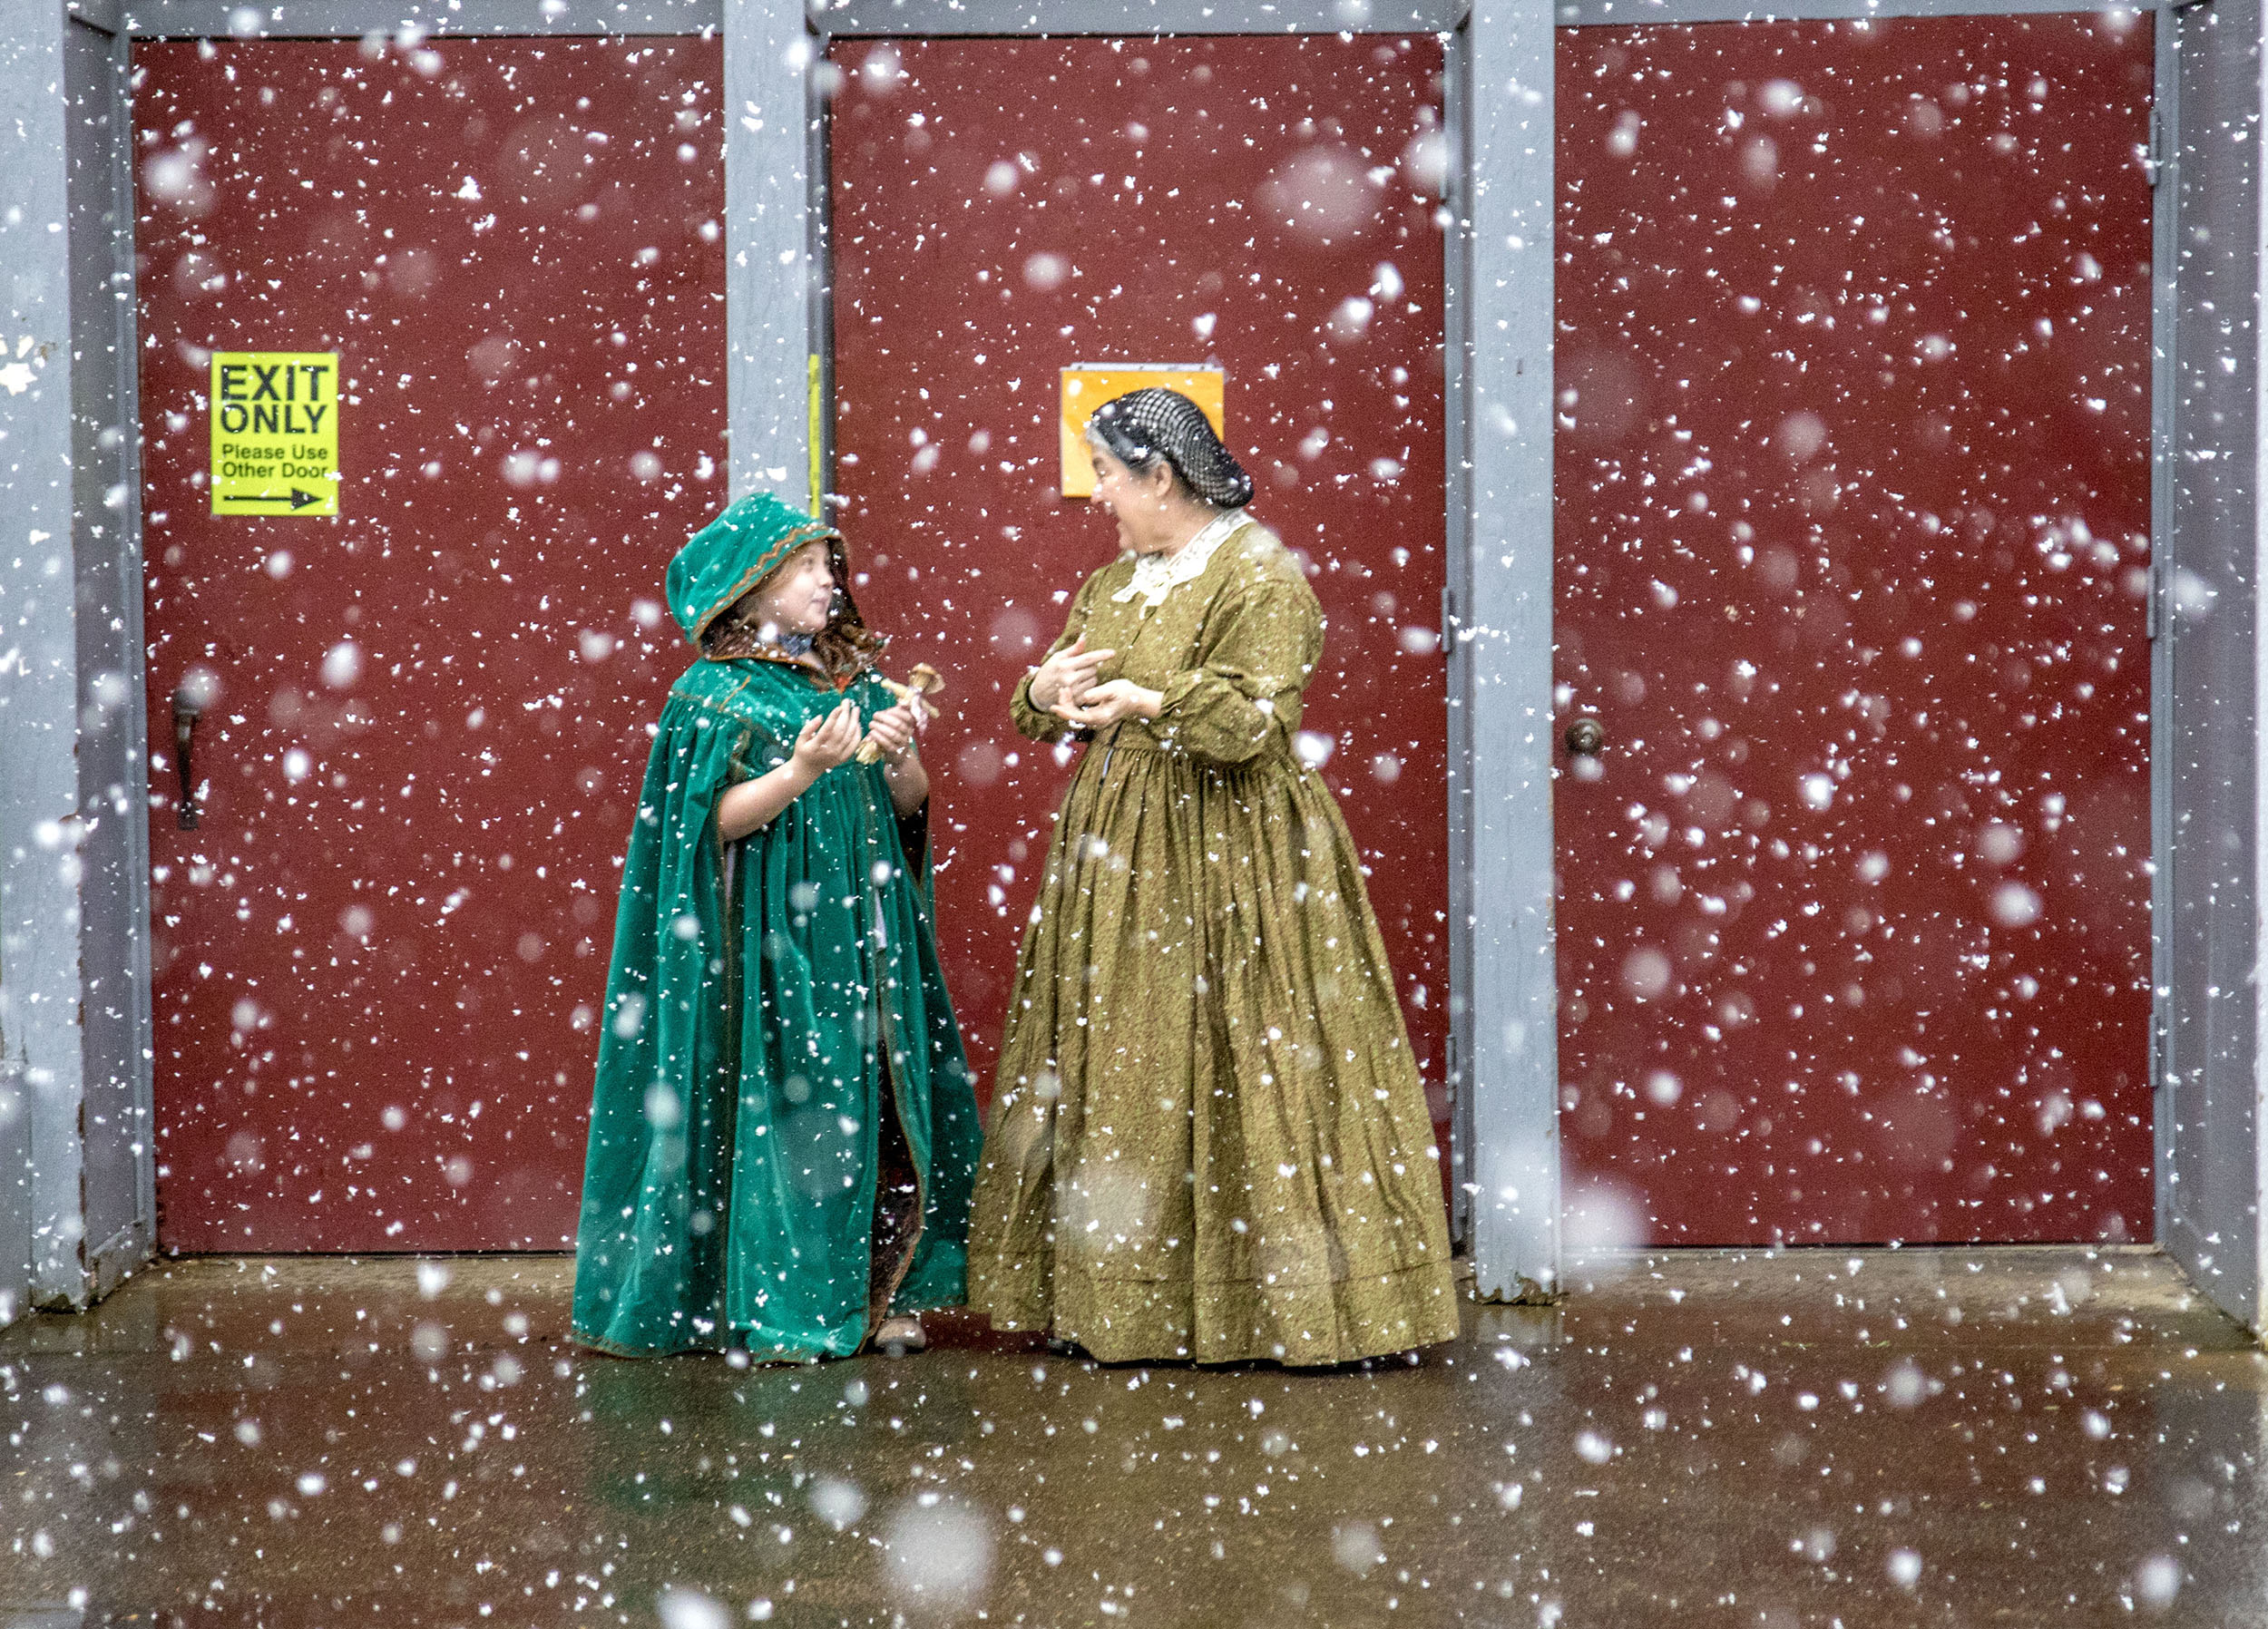  Hailey McKendrick, 7, and Lisa Ponder step outside the Frontier Heritage Fair to watch a rare snowfall in Eugene, Ore., on Sunday, Feb. 19, 2018. The Heritage Fair brought old fashioned clothing, art and tools to 21st century Eugene. Ponder attended